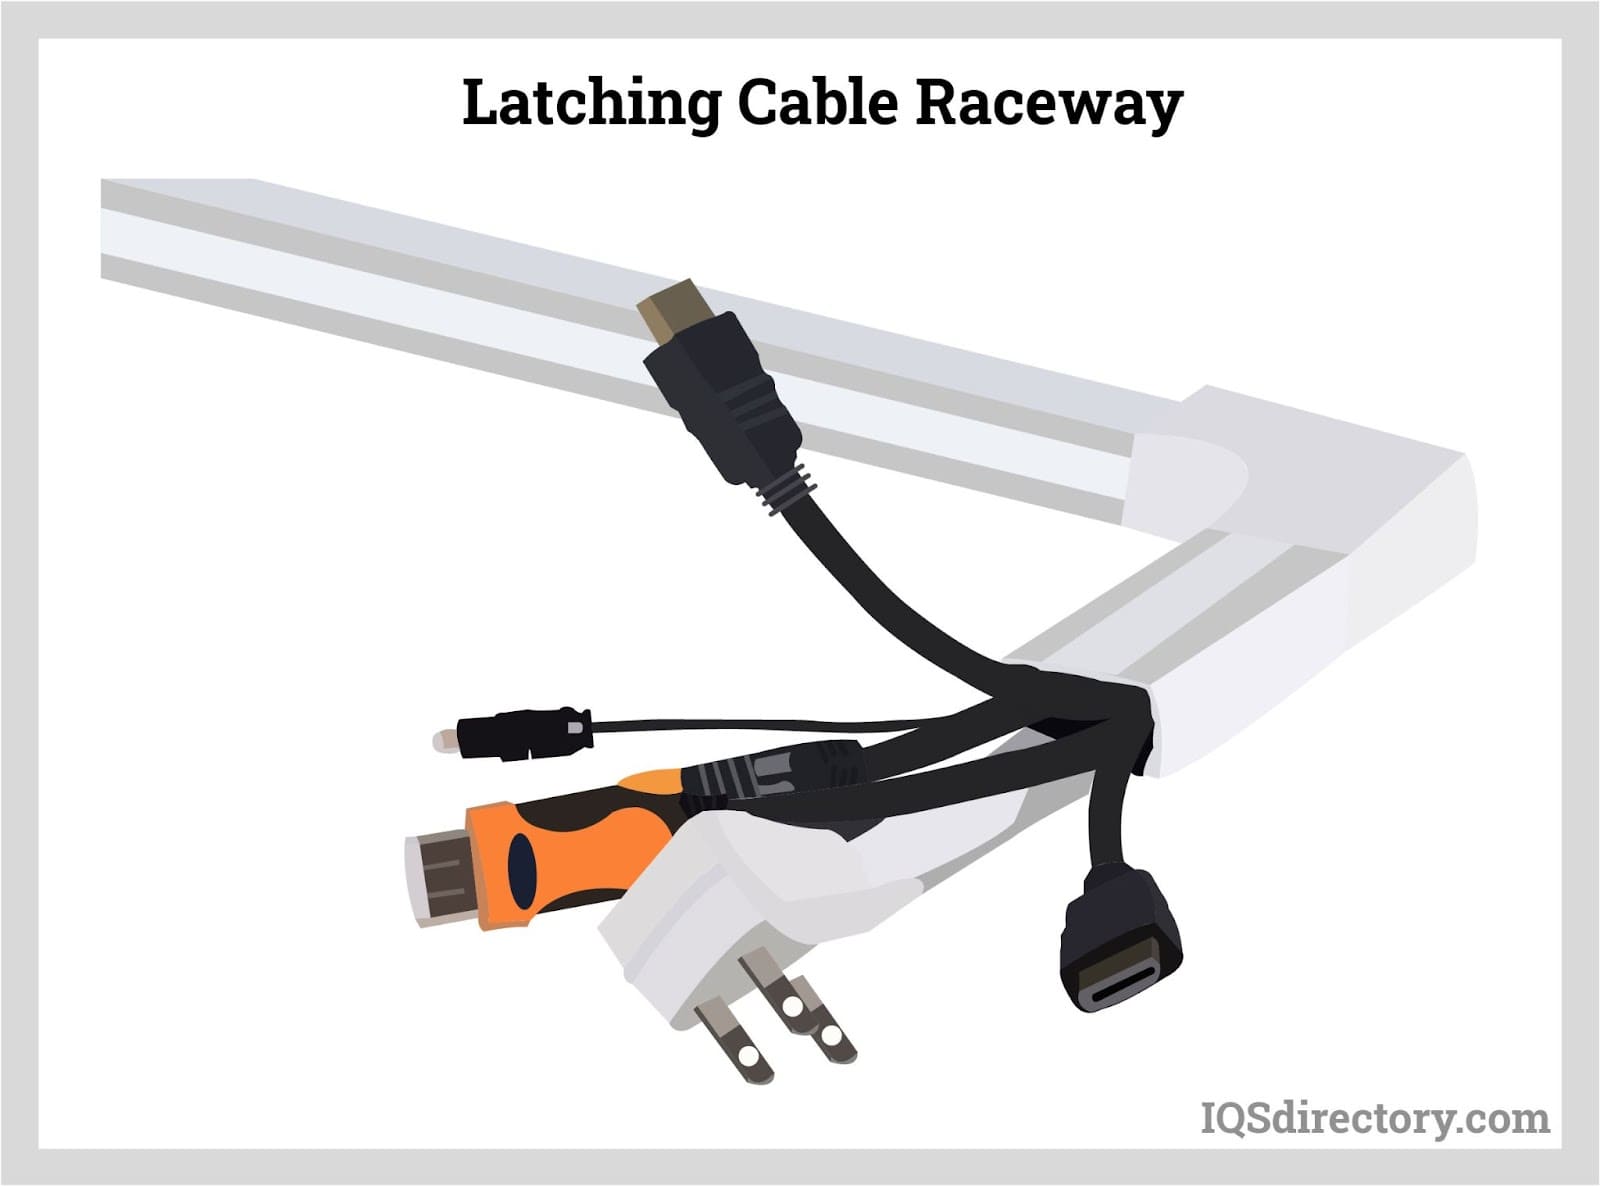 Latching Cable Raceway